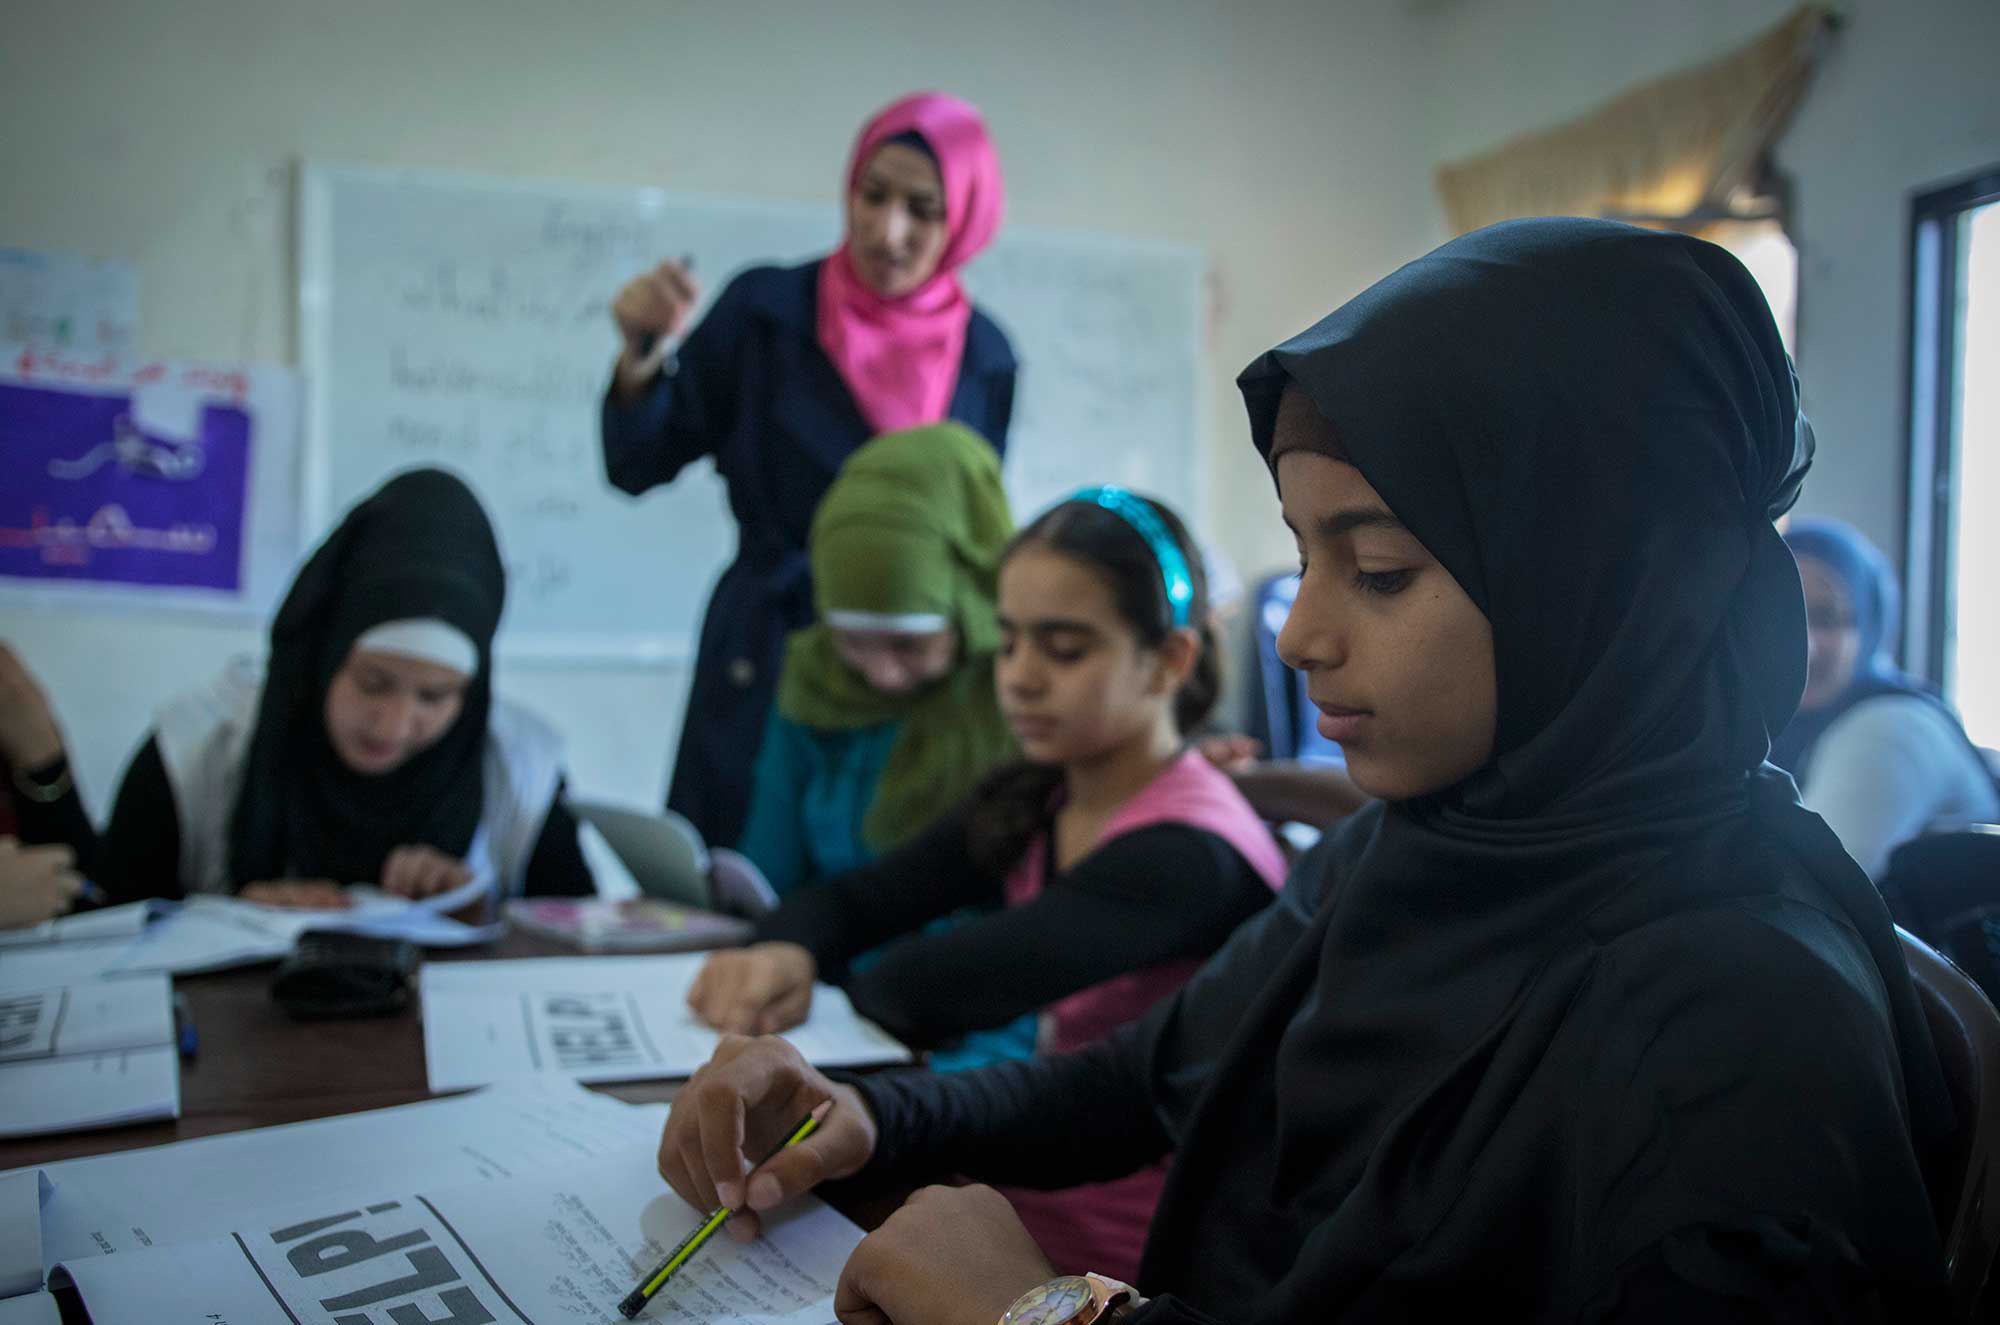 Many teens in Anera's refugee education program have been forced out of formal schooling. Some will not go back. This is the only education they will receive.